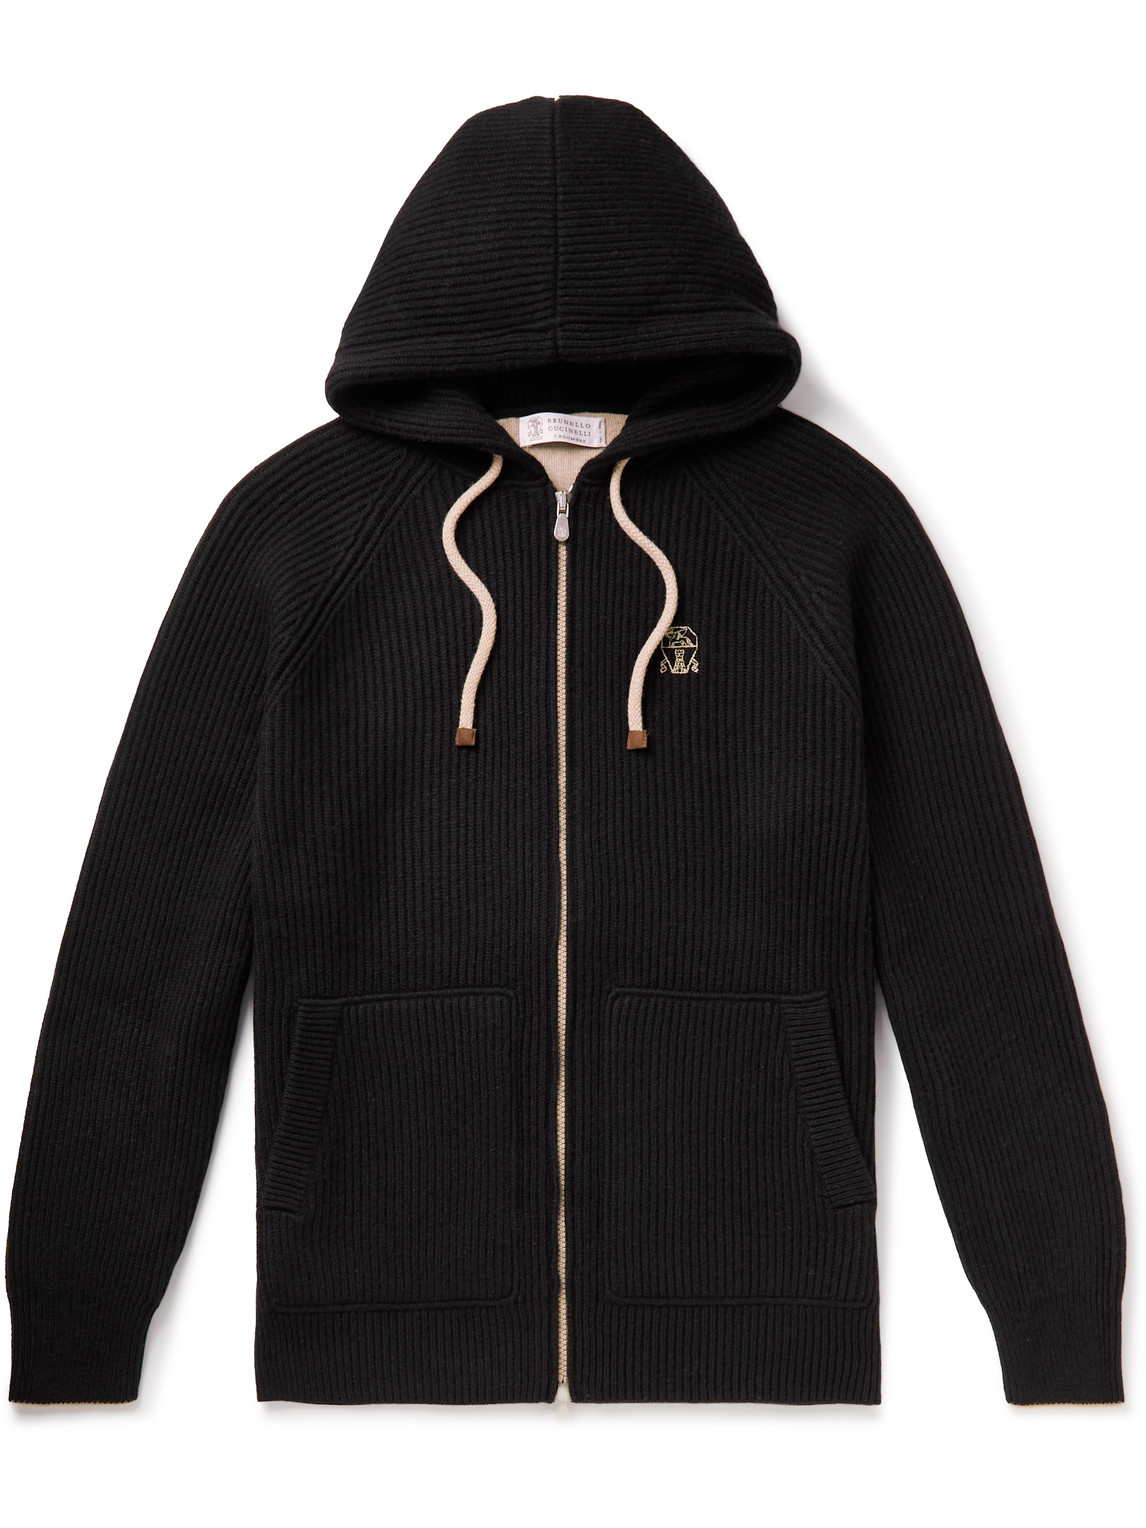 BRUNELLO CUCINELLI RIBBED CASHMERE ZIP-UP HOODIE